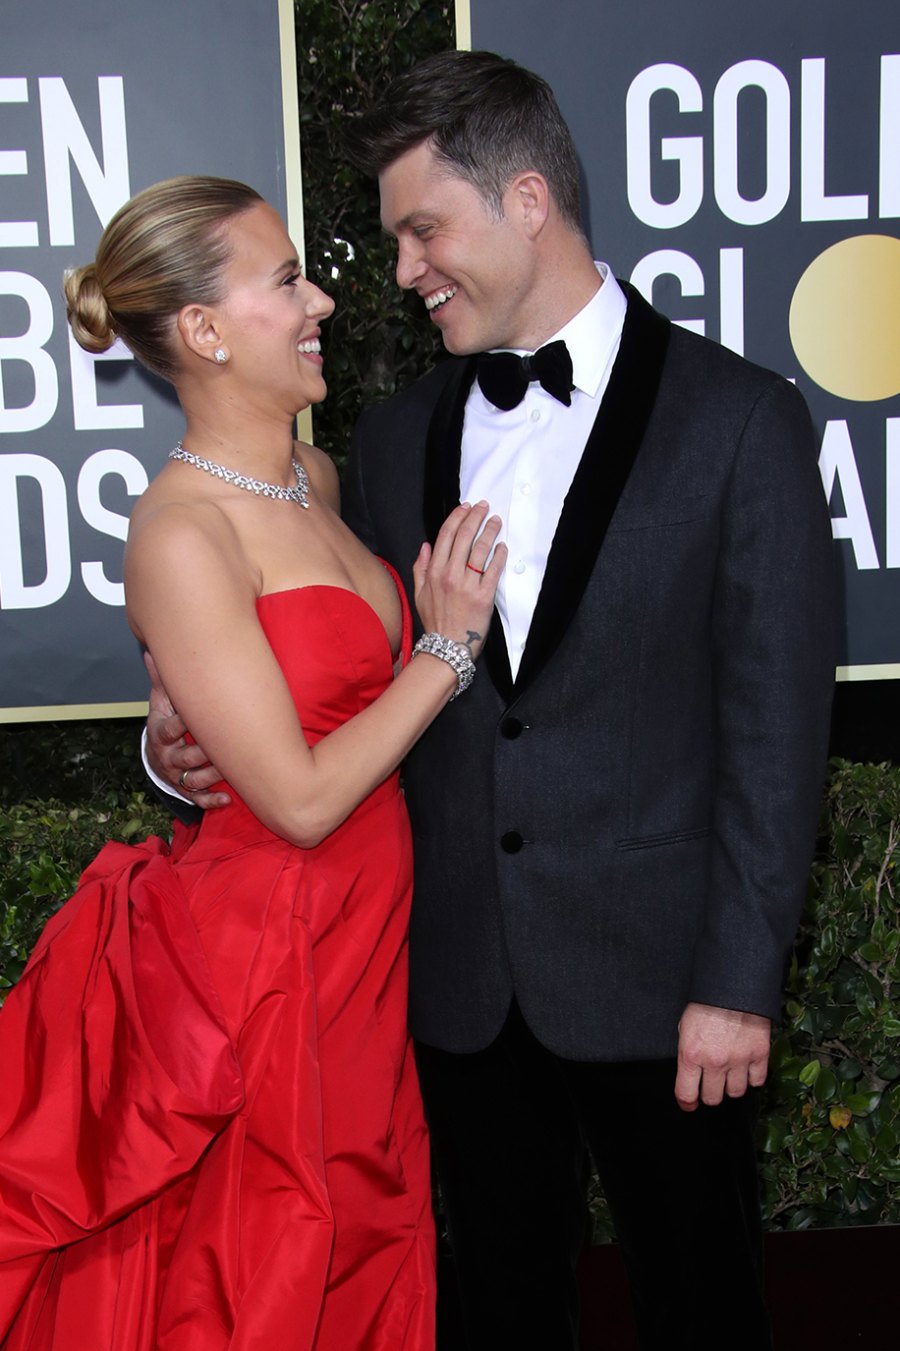 The couple at the Golden Globes 2020